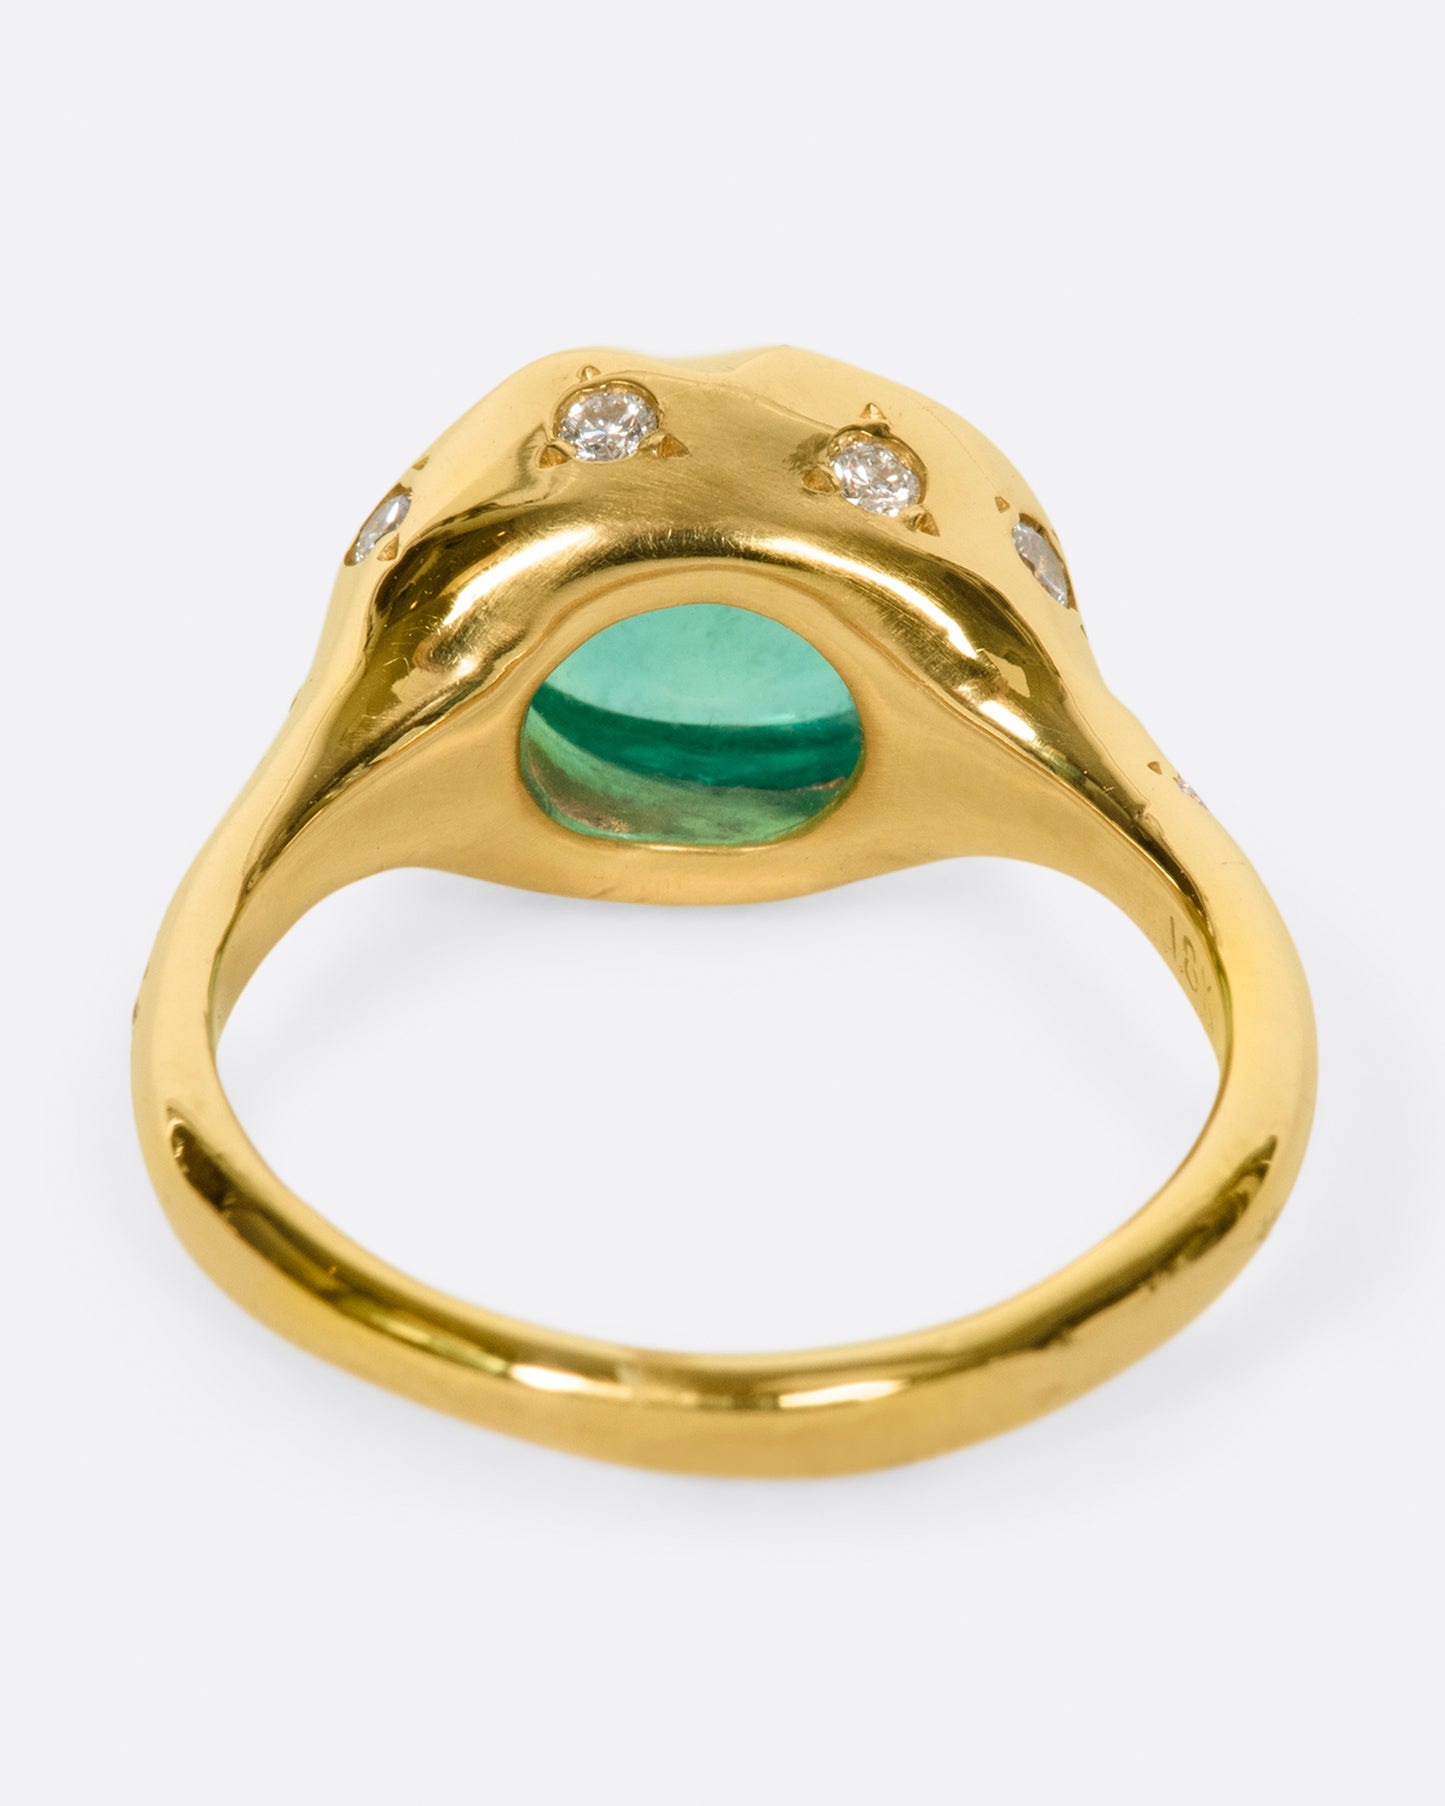 A bright green emerald cabochon sits at the center of this signet style ring.